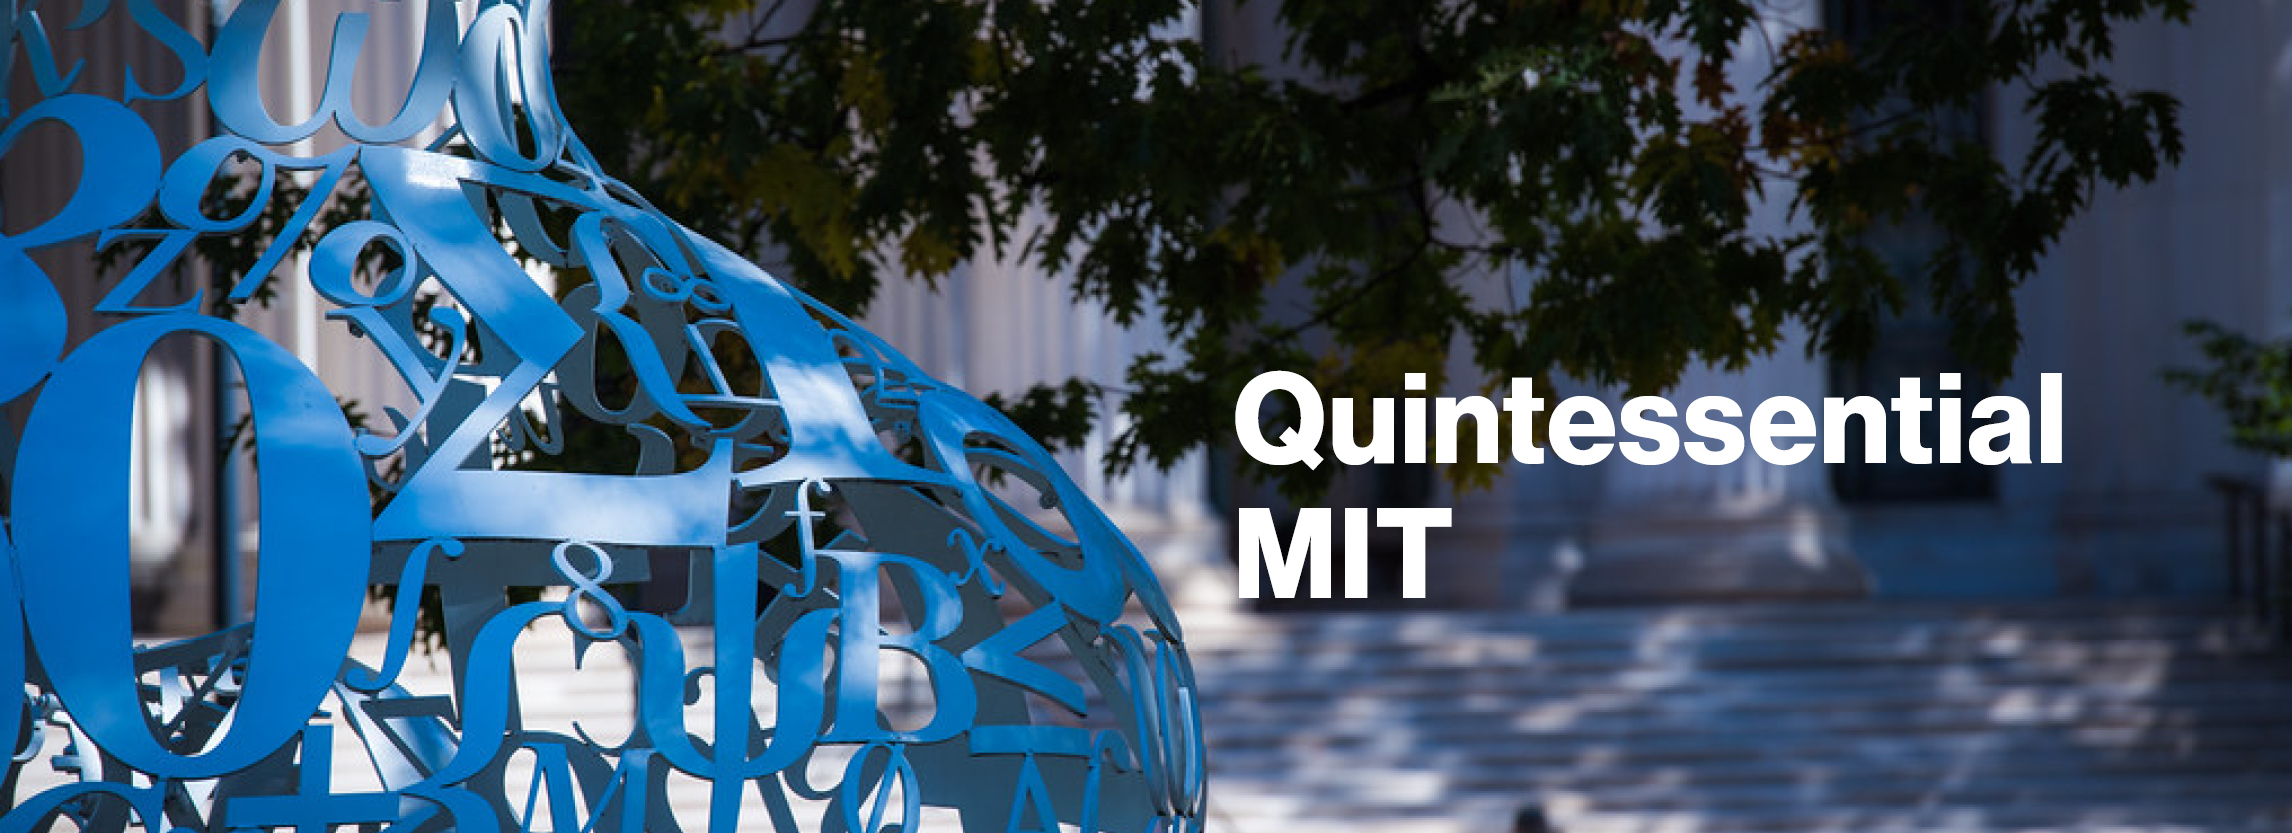 We see the shoulder of the sculpture Alchemist by Jaume Plensa, commissioned by an anonymous alumnus on the occasion of the Institute’s 150th anniversary. The words on the image read Quintessential MIT.